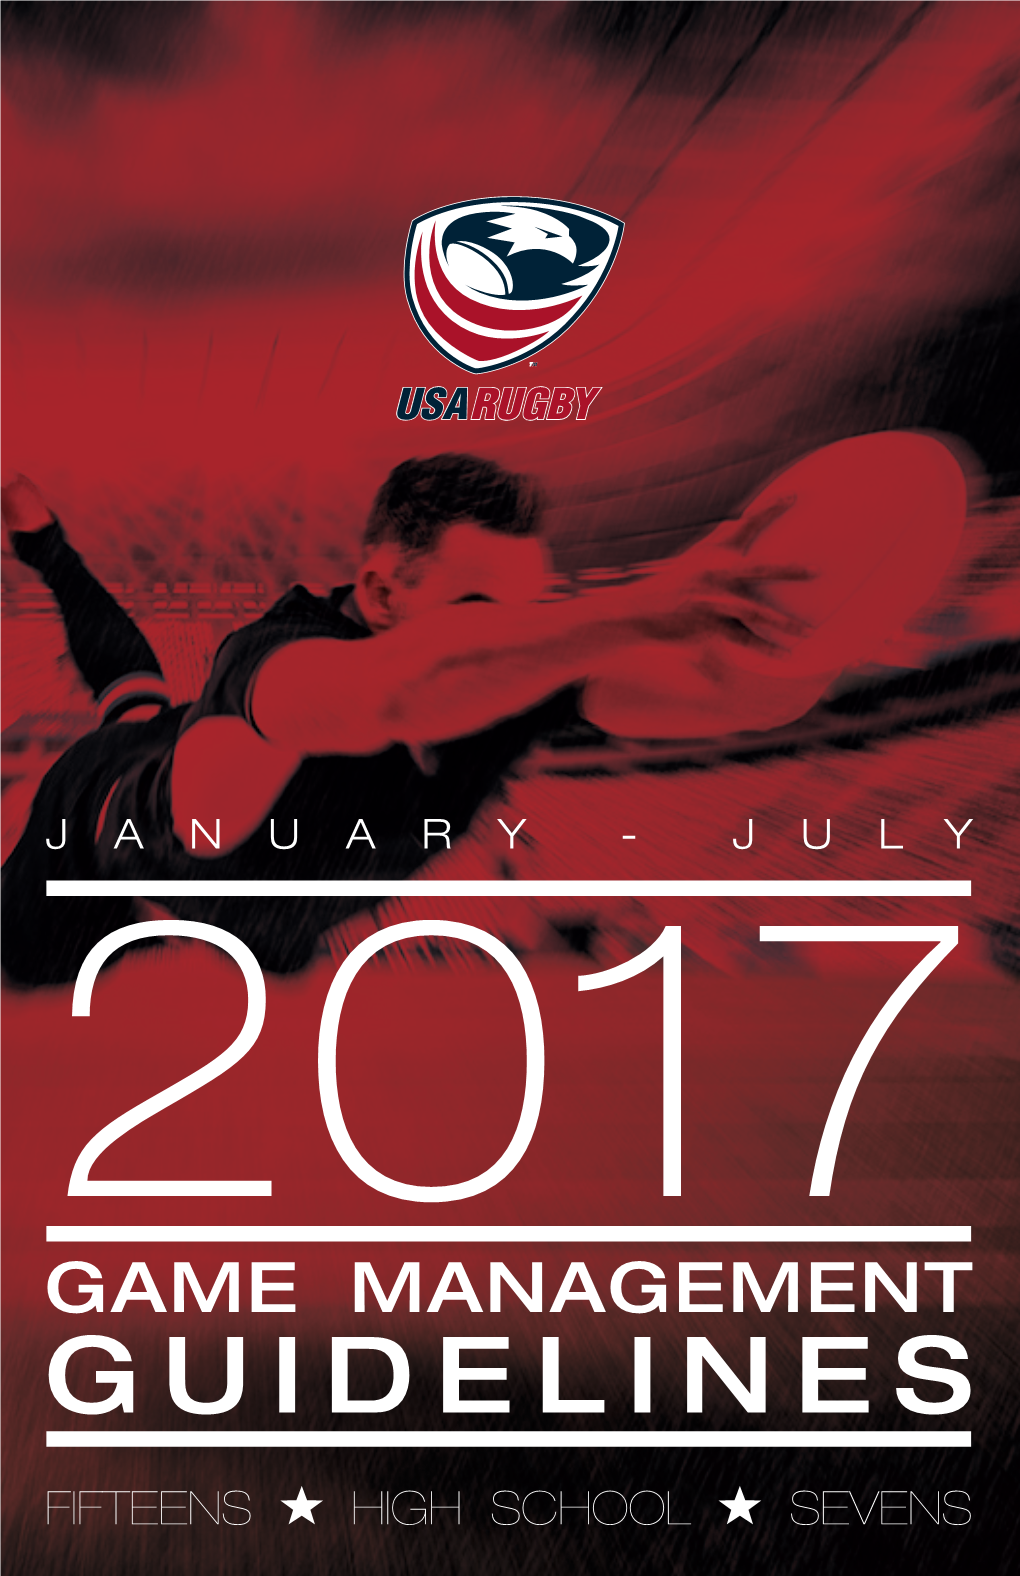 Game Management Guidelines : January - July 2017